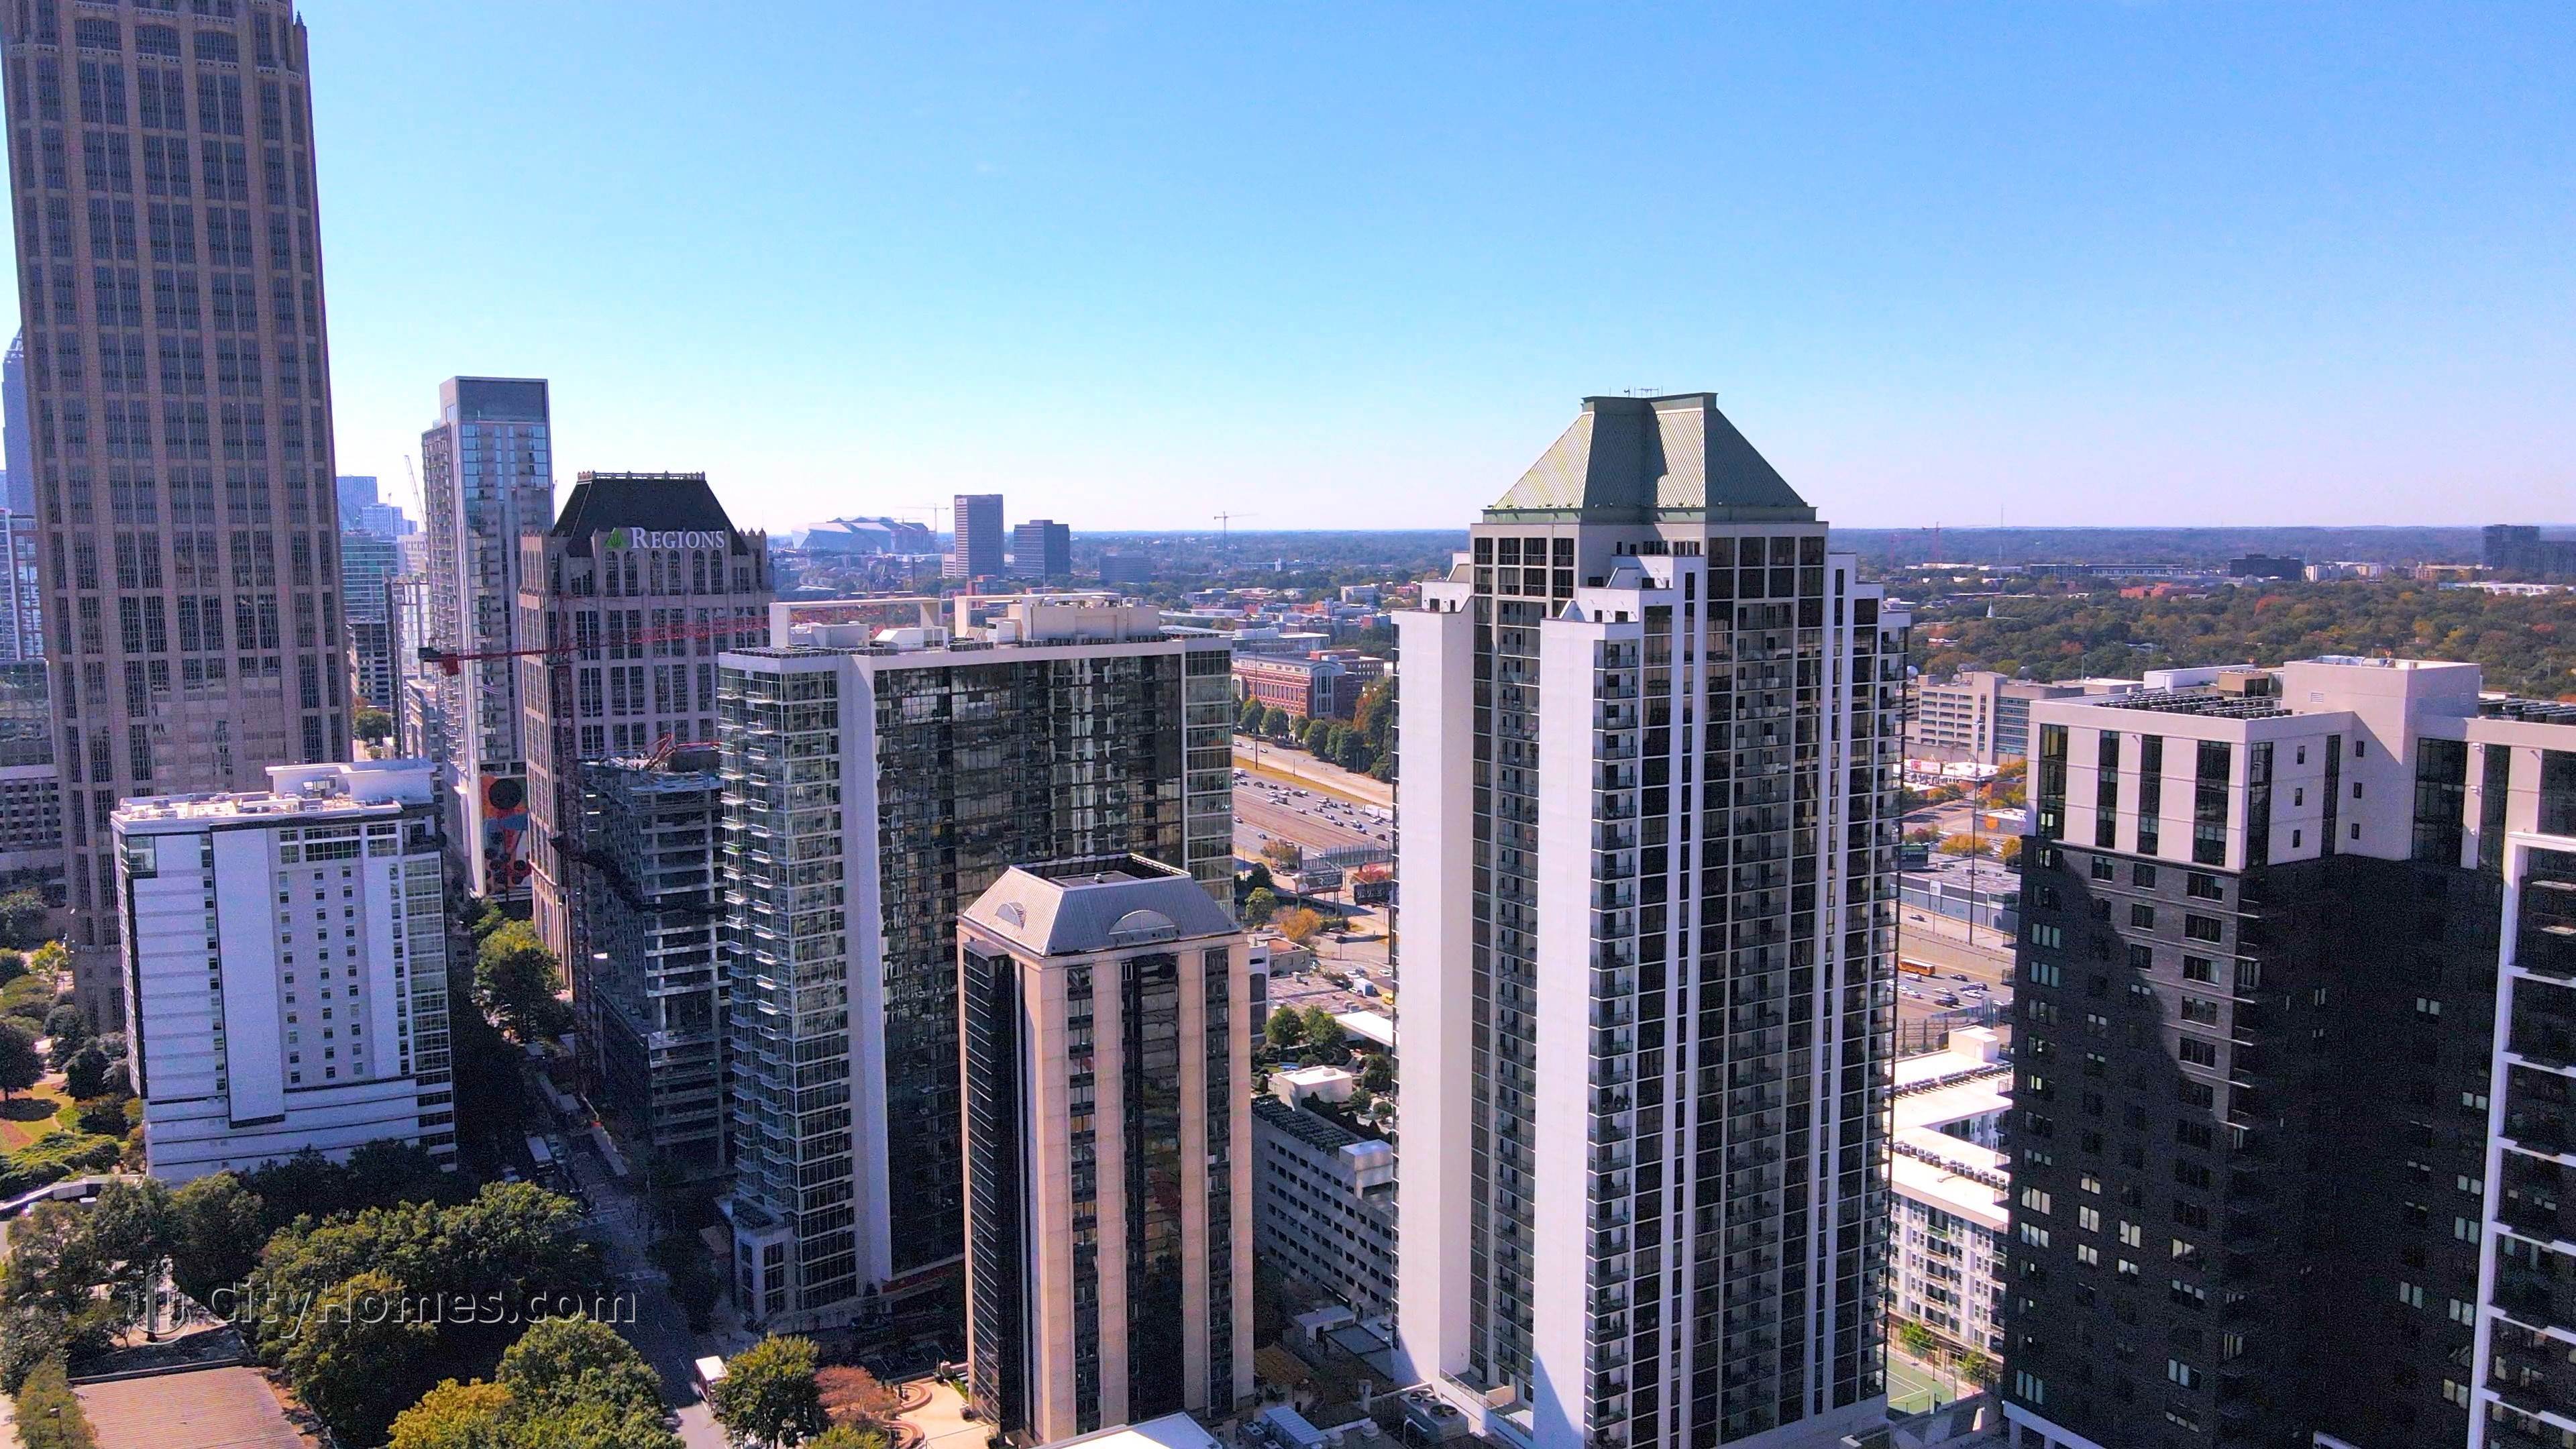 5. 1280 West Condos bâtiment à 1280 West Peachtree St NW, Greater Midtown, Atlanta, GA 30309